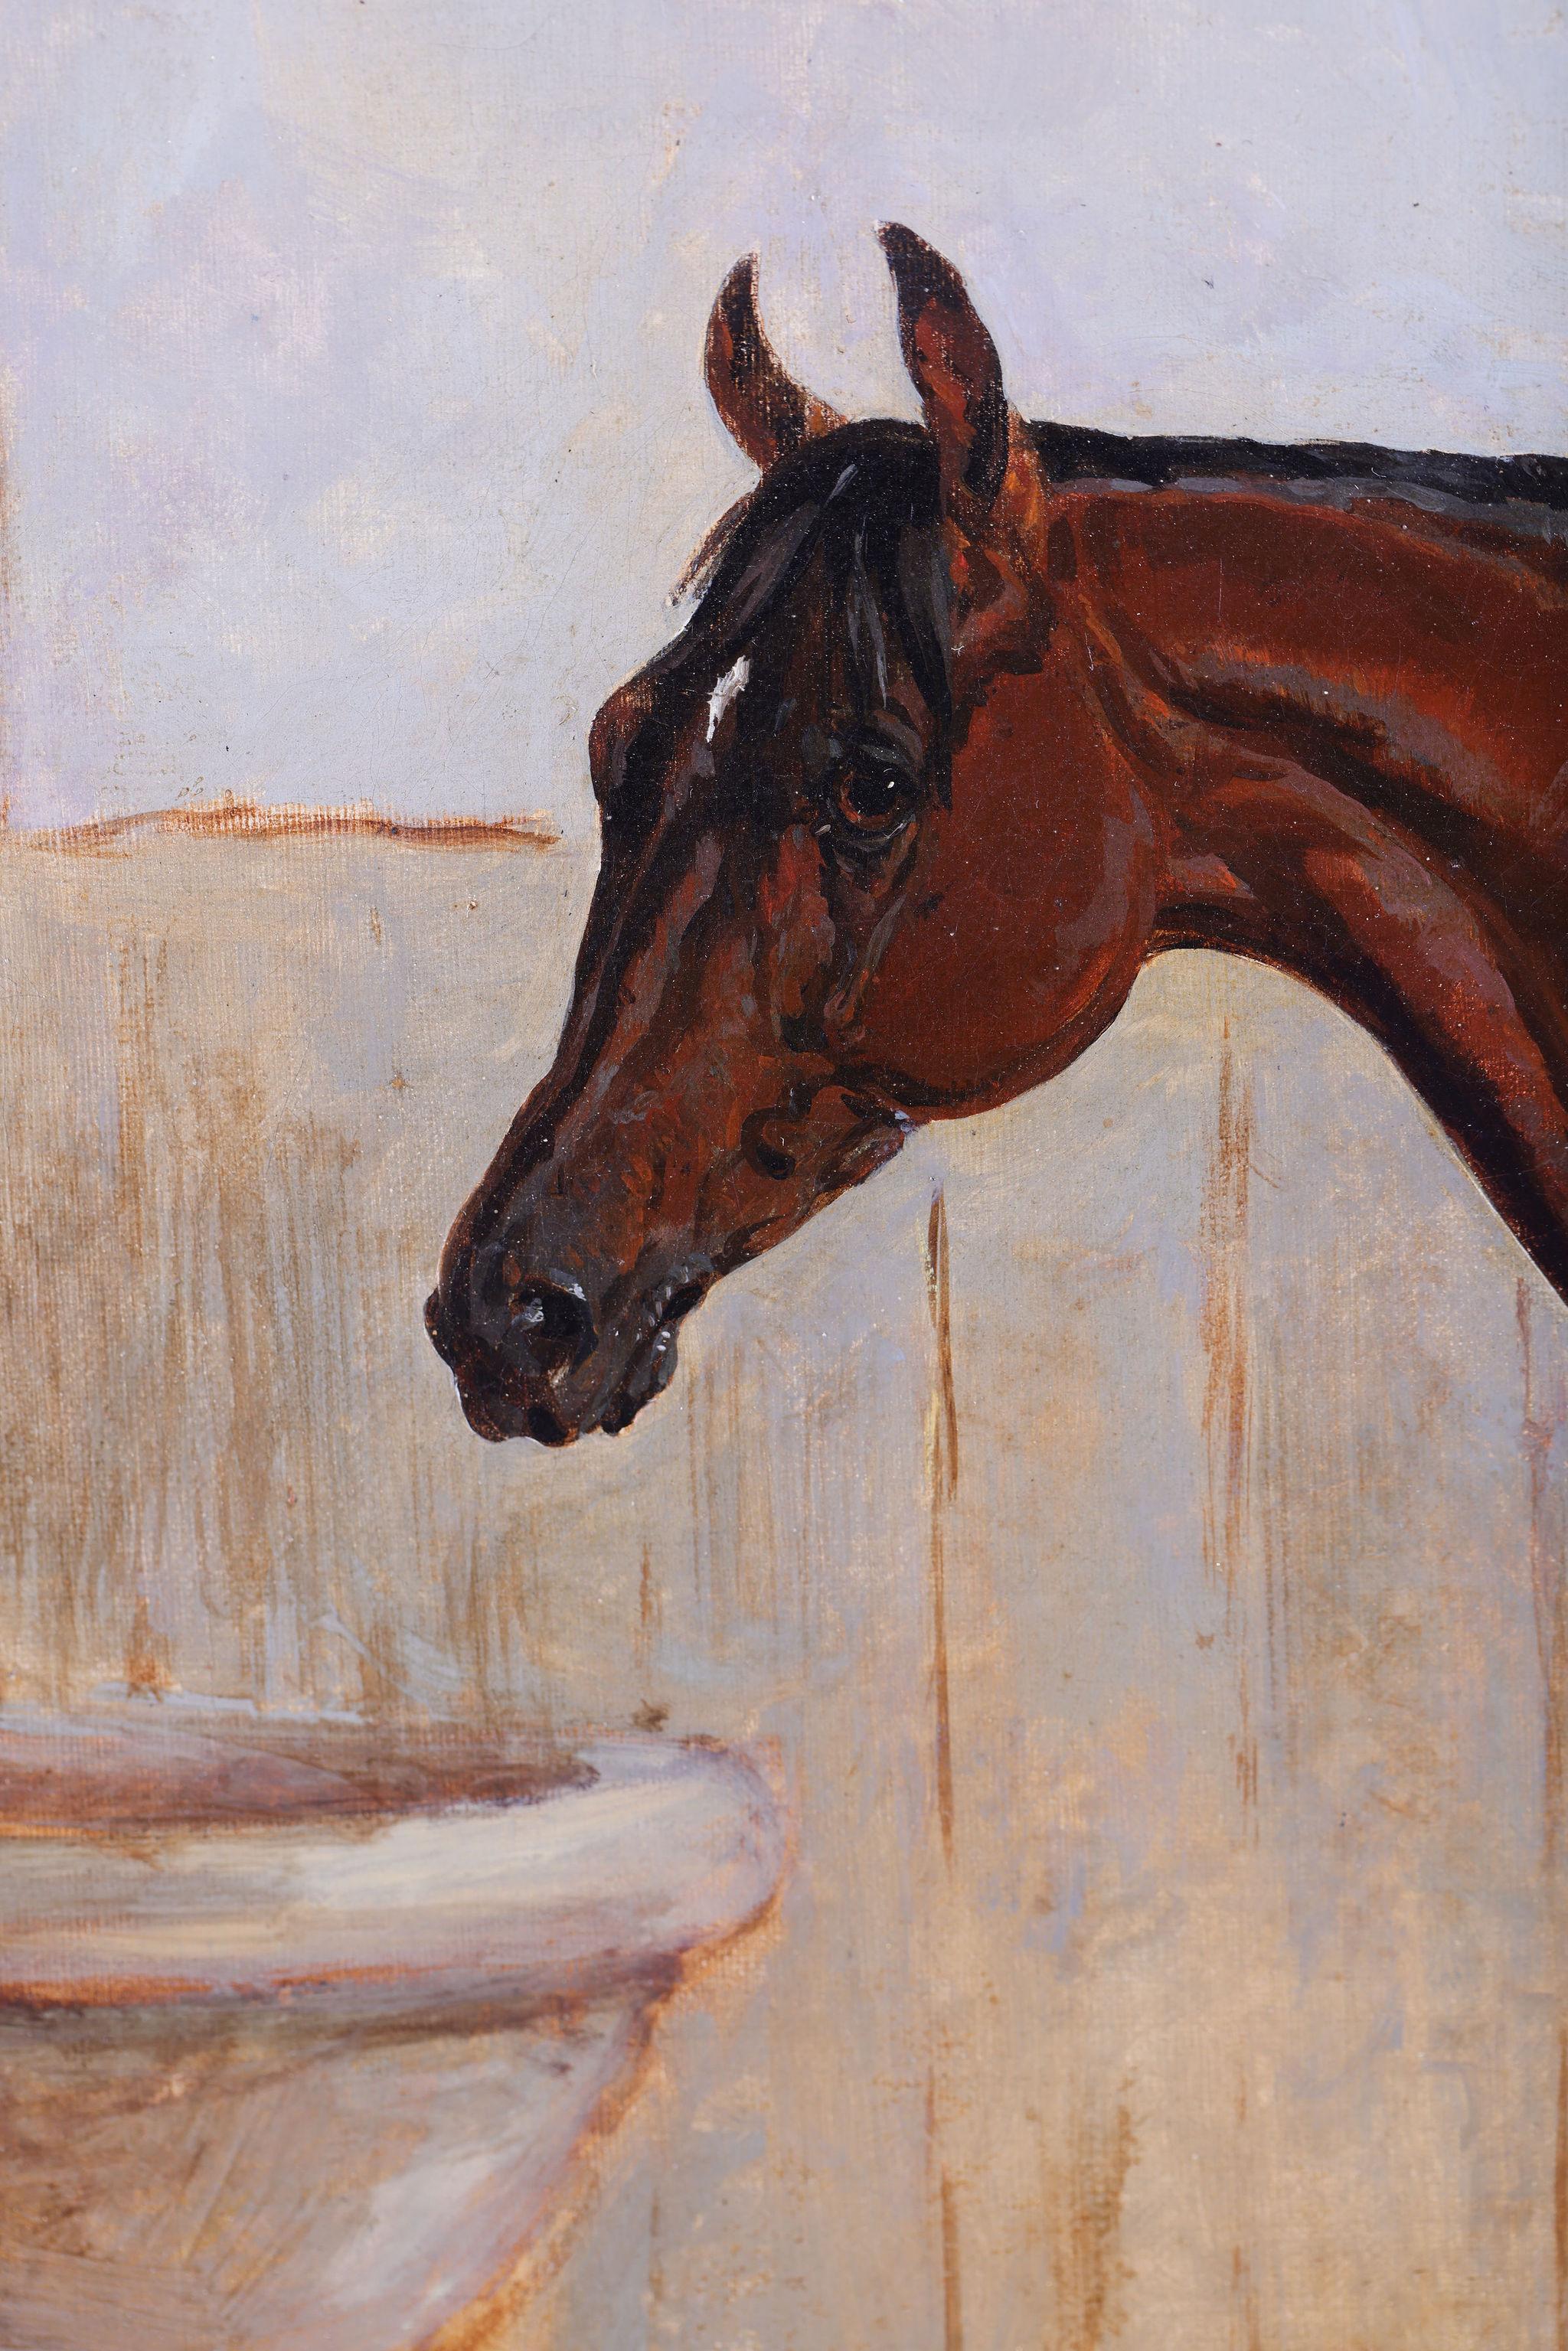 Oil on Canvas

A portrait of the racehorse St. Francis. On the reverse is an article written for The Times newspaper regarding the life history and achievements of this horse.T he article written for The Times is a fascinating piece showing the high